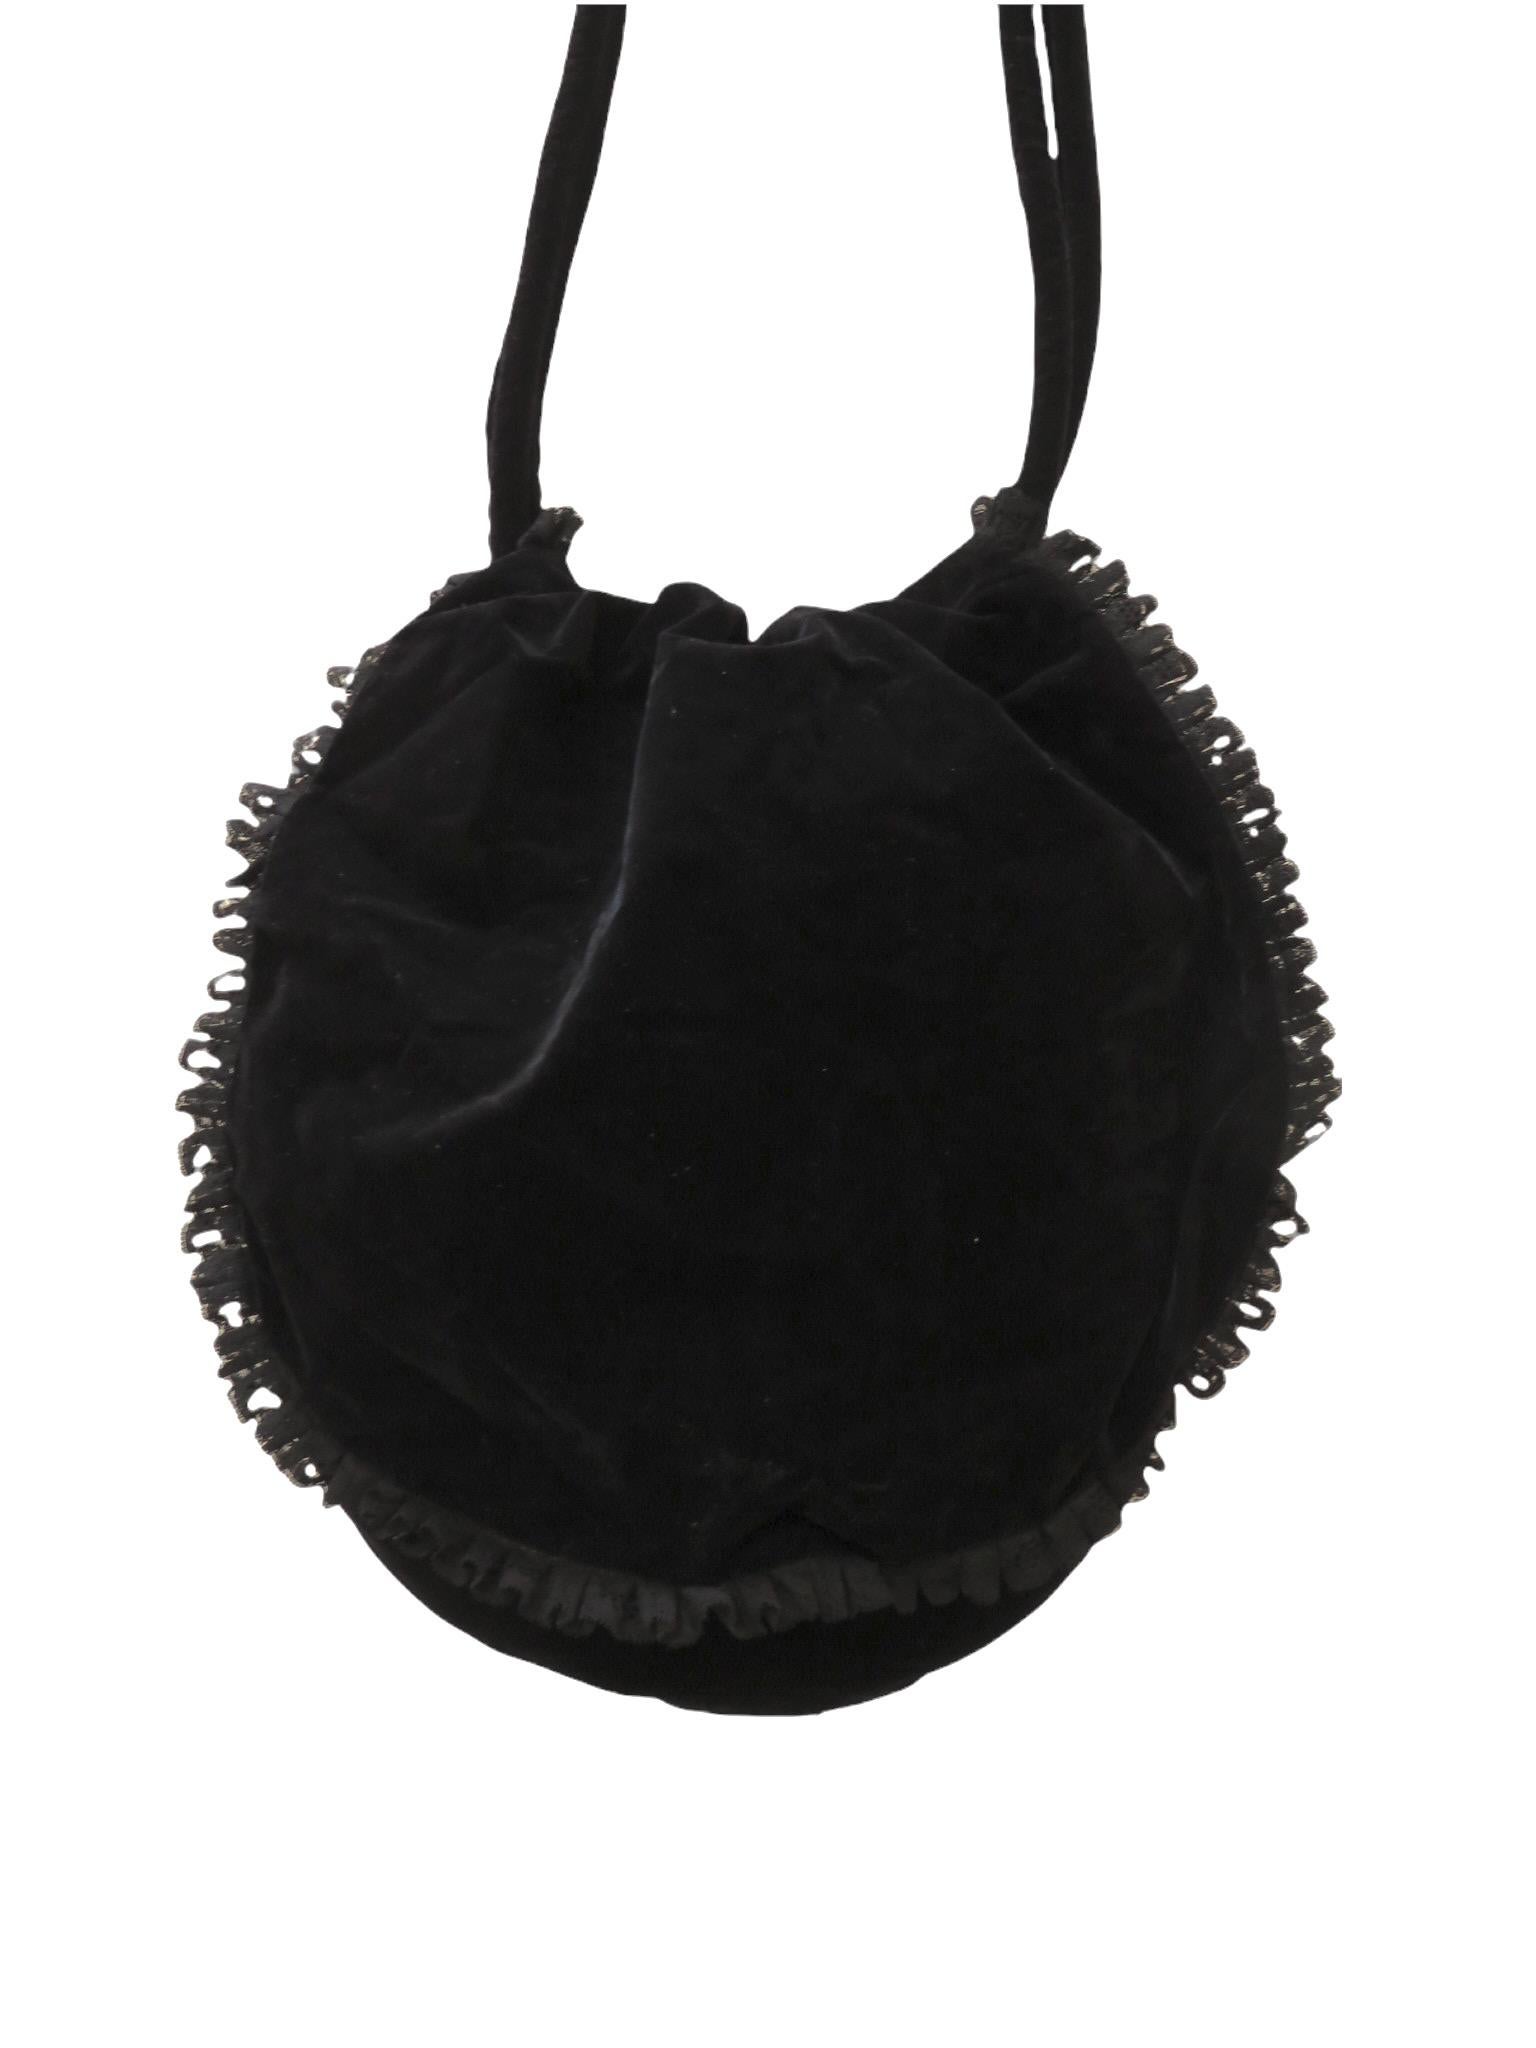 An ample handbag from vintage Chantal Thomass is constructed of soft black velvet. The flap features black lace ruffle embellishments. Beneath the flap is a deep pouch secured with a black drawstring cord. Carry it with confidence as you shoulder